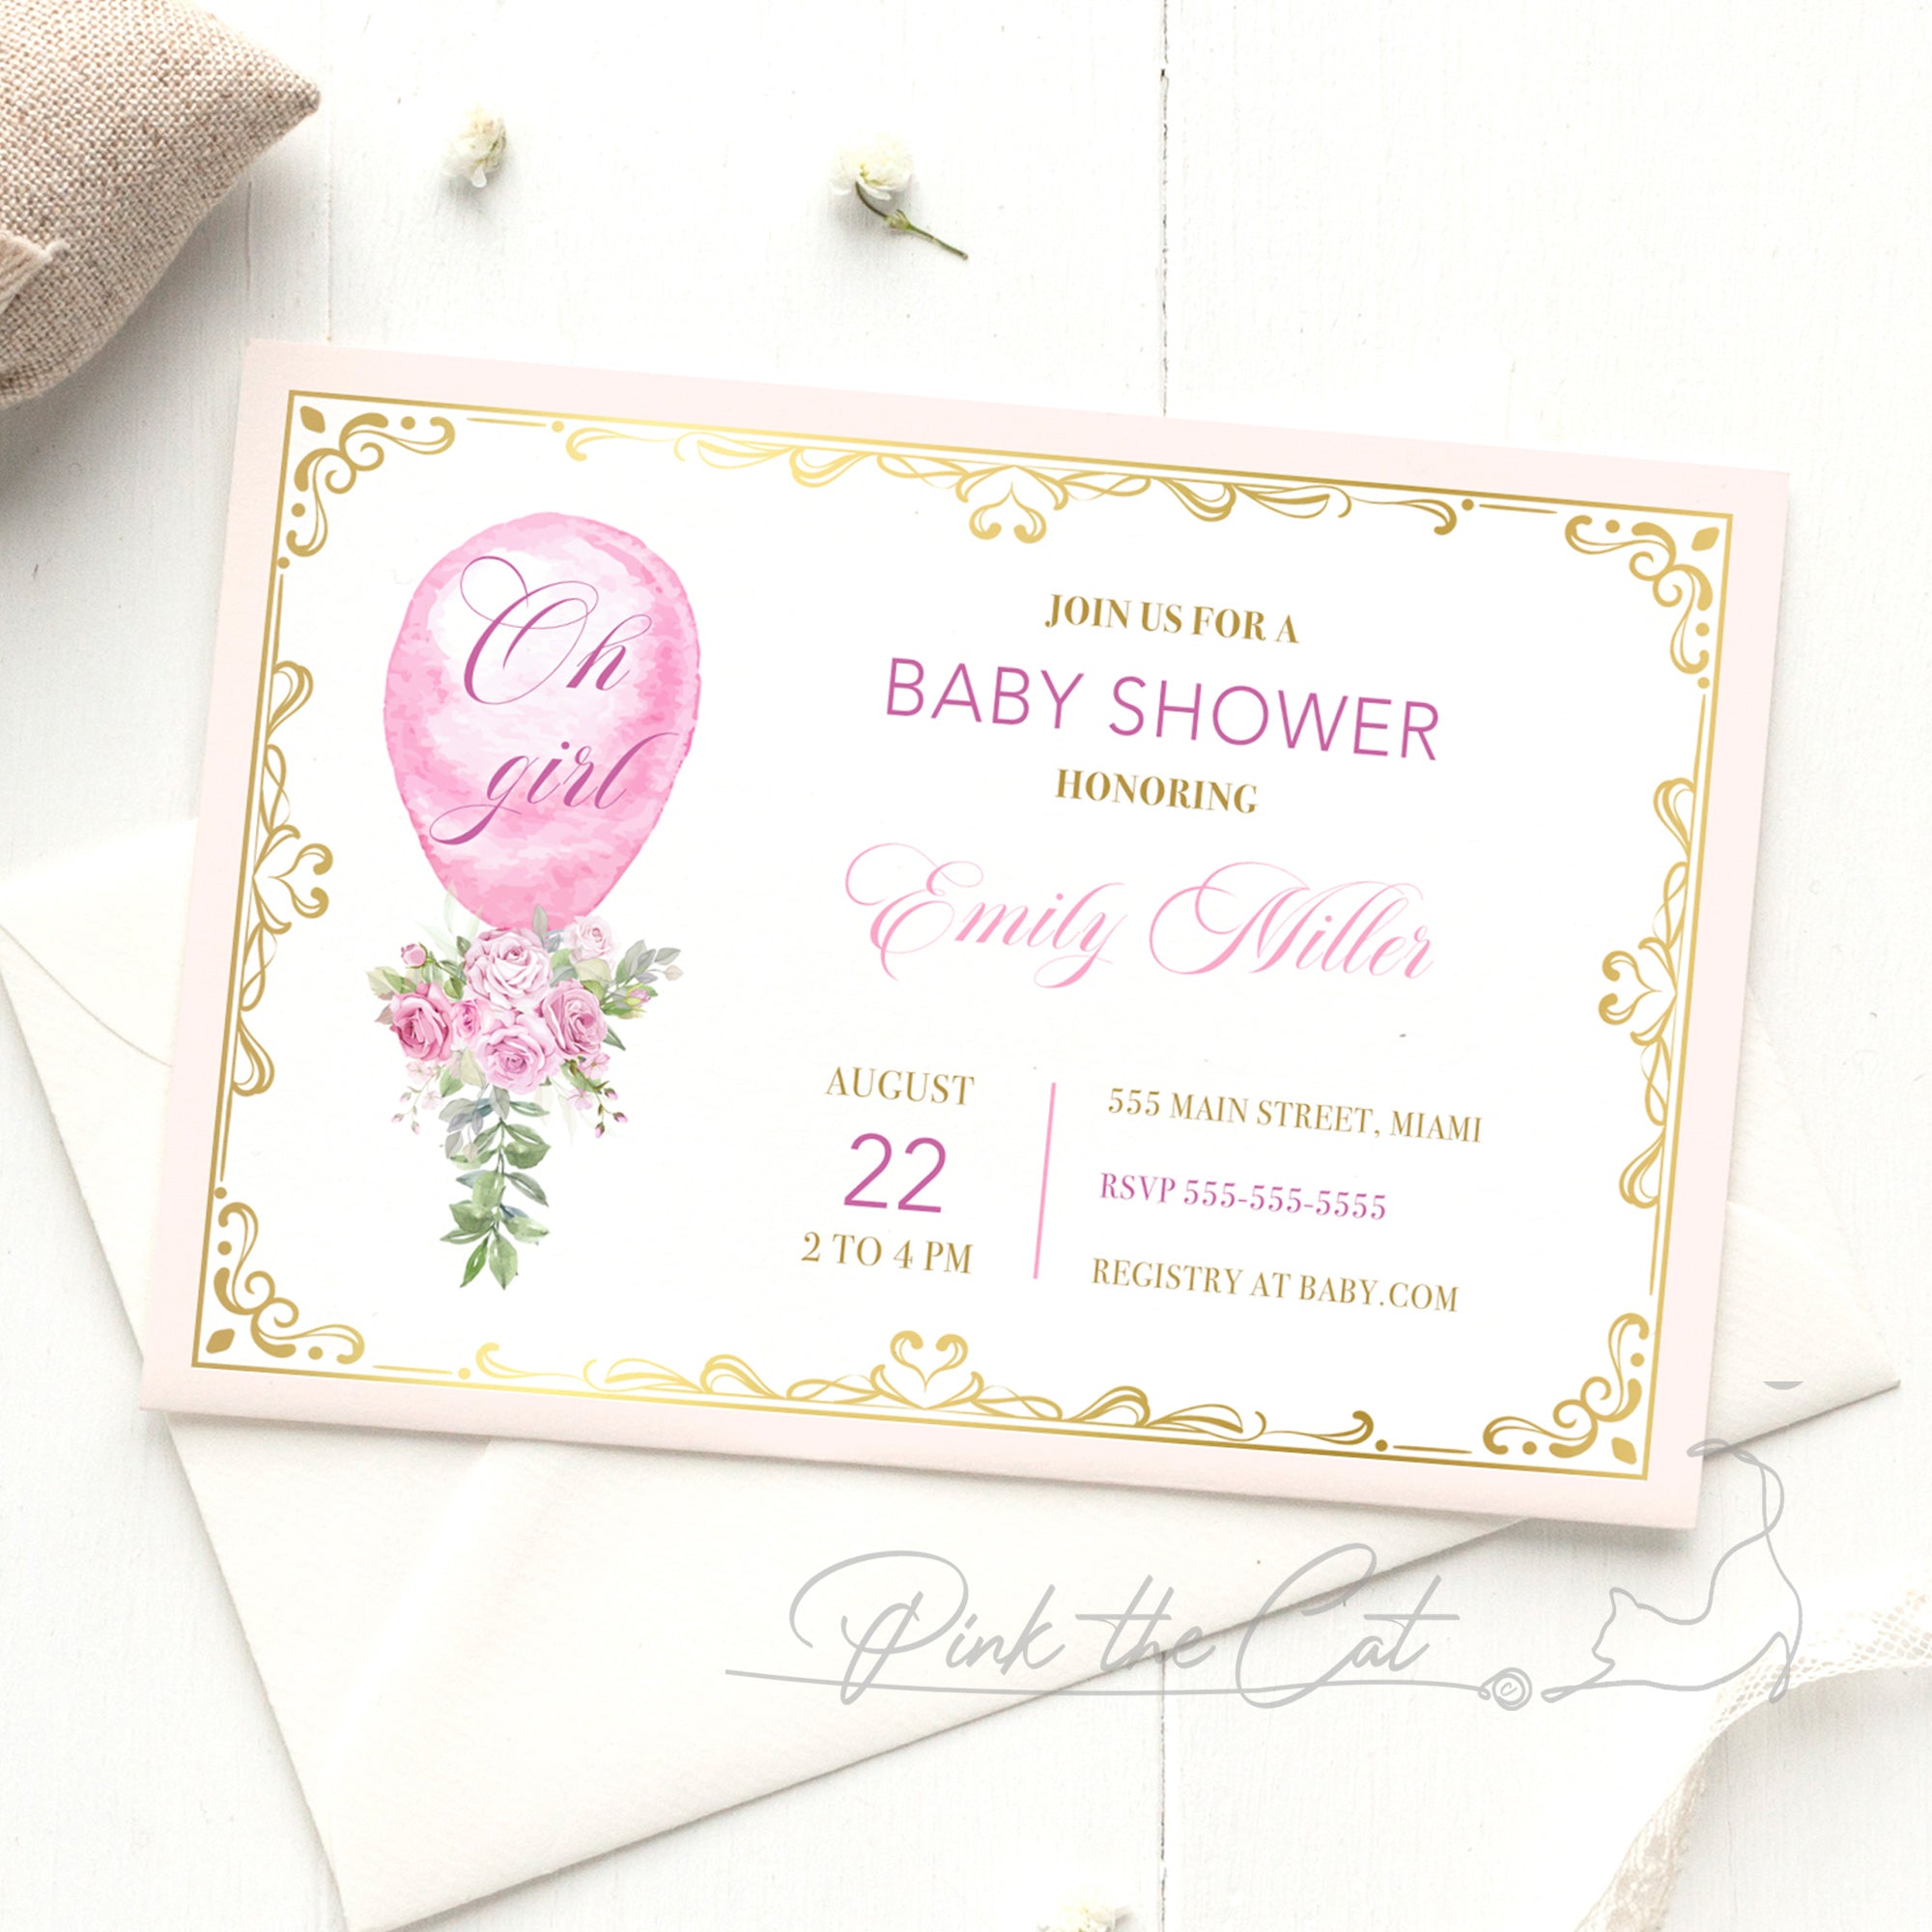 Oh girl baby shower invitations gold pink balloon greenery watercolor